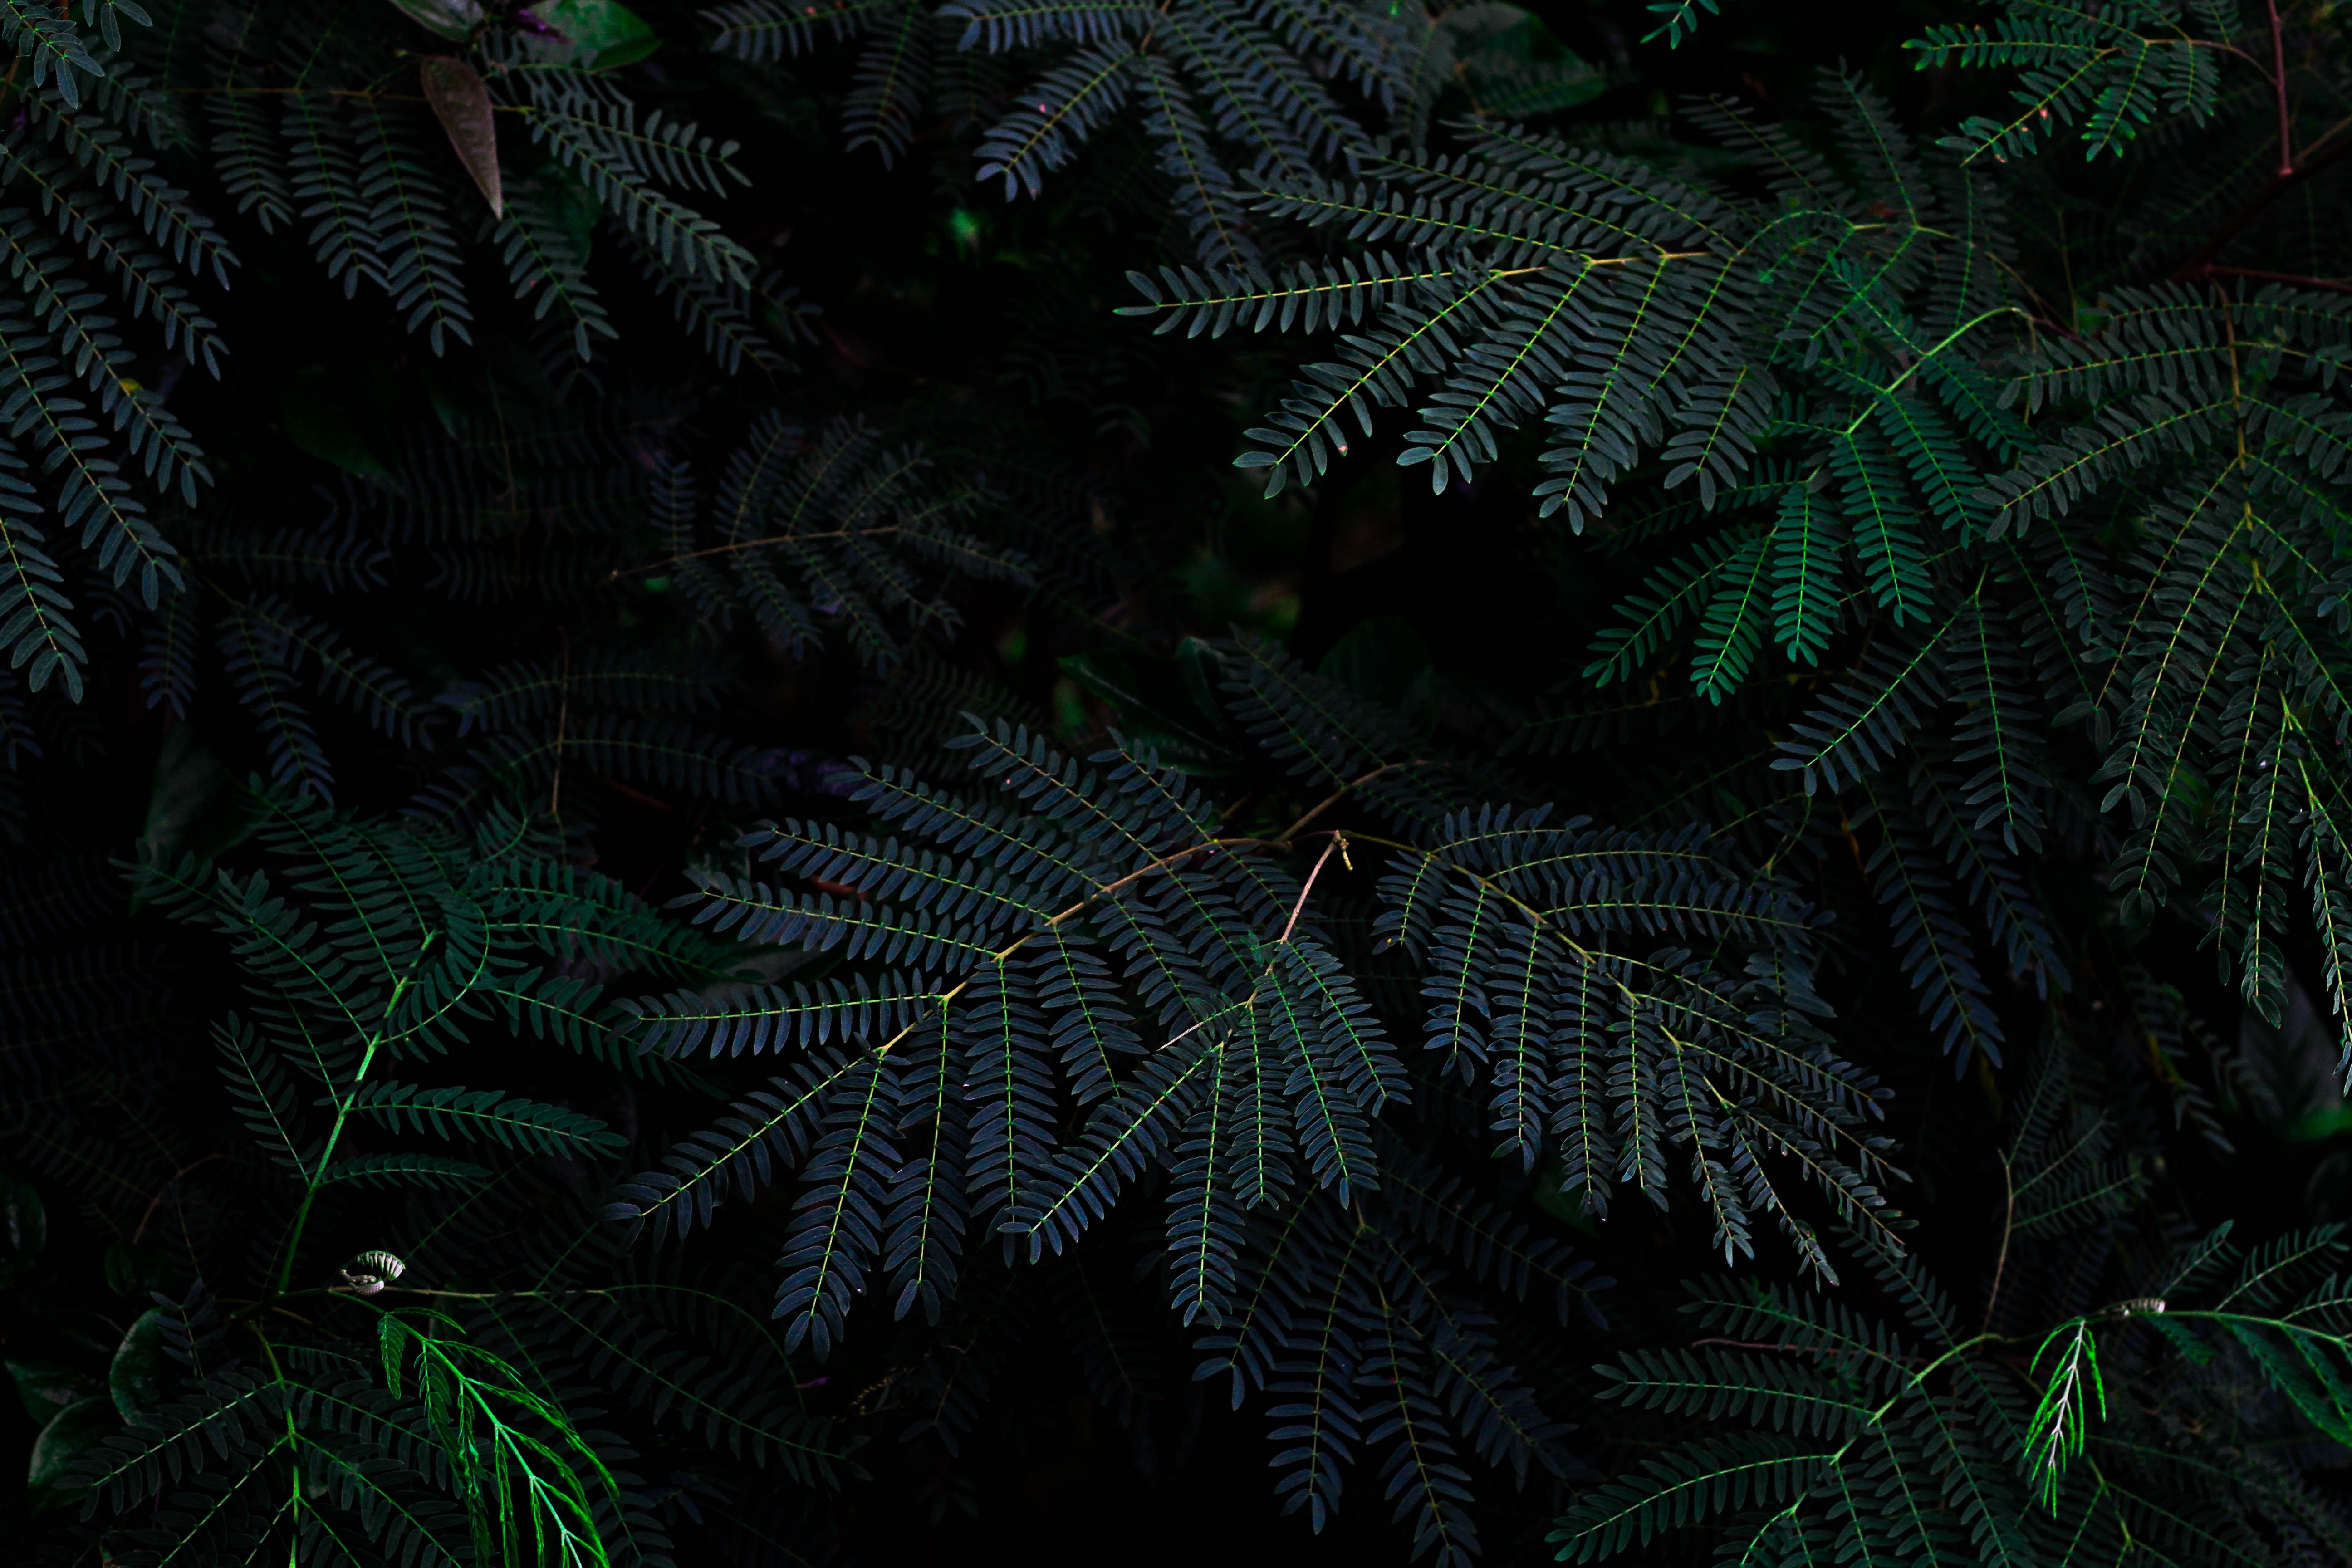 HD Wallpaper Up Close Photo Of Dark Green Pine Tree Limbs In A